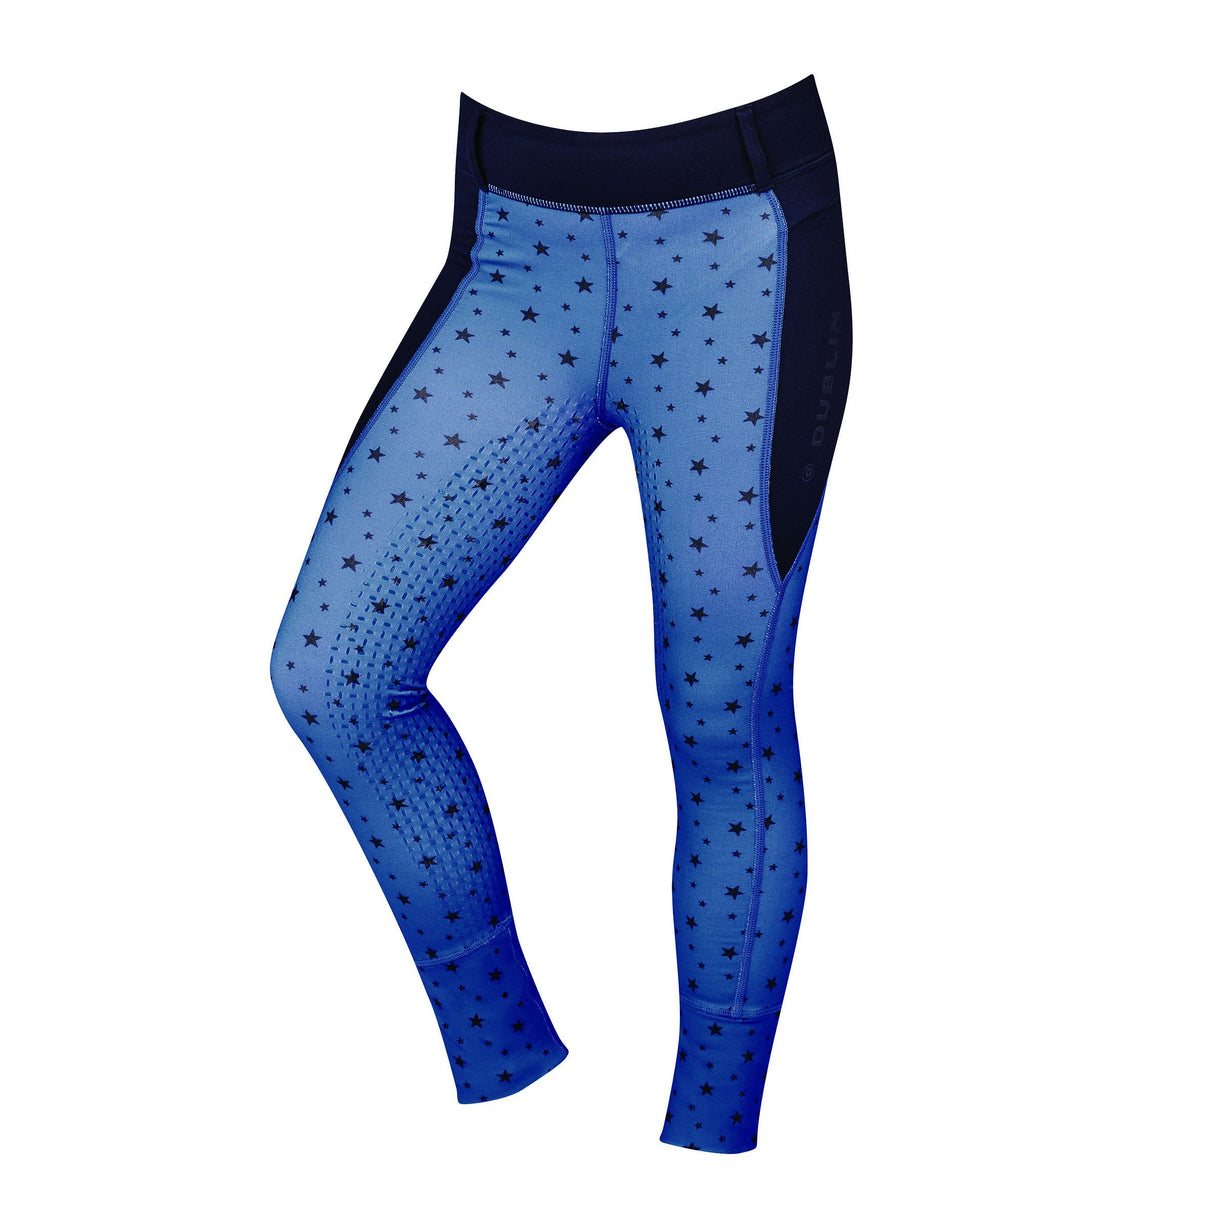 Dublin Printed Cool It Everyday Childs Riding Tights